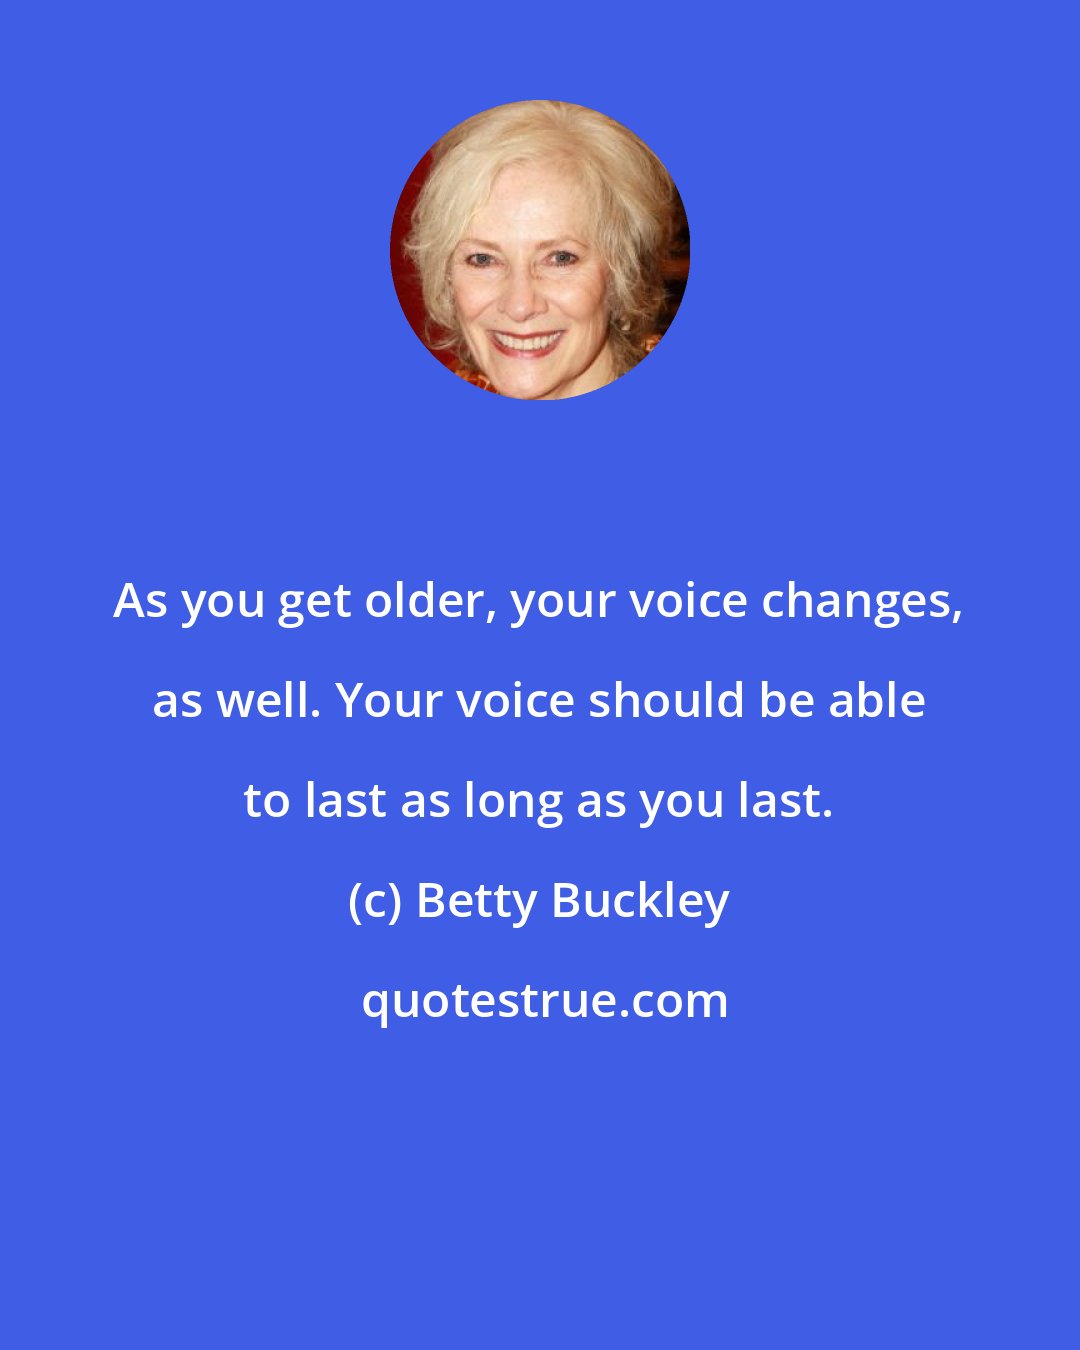 Betty Buckley: As you get older, your voice changes, as well. Your voice should be able to last as long as you last.